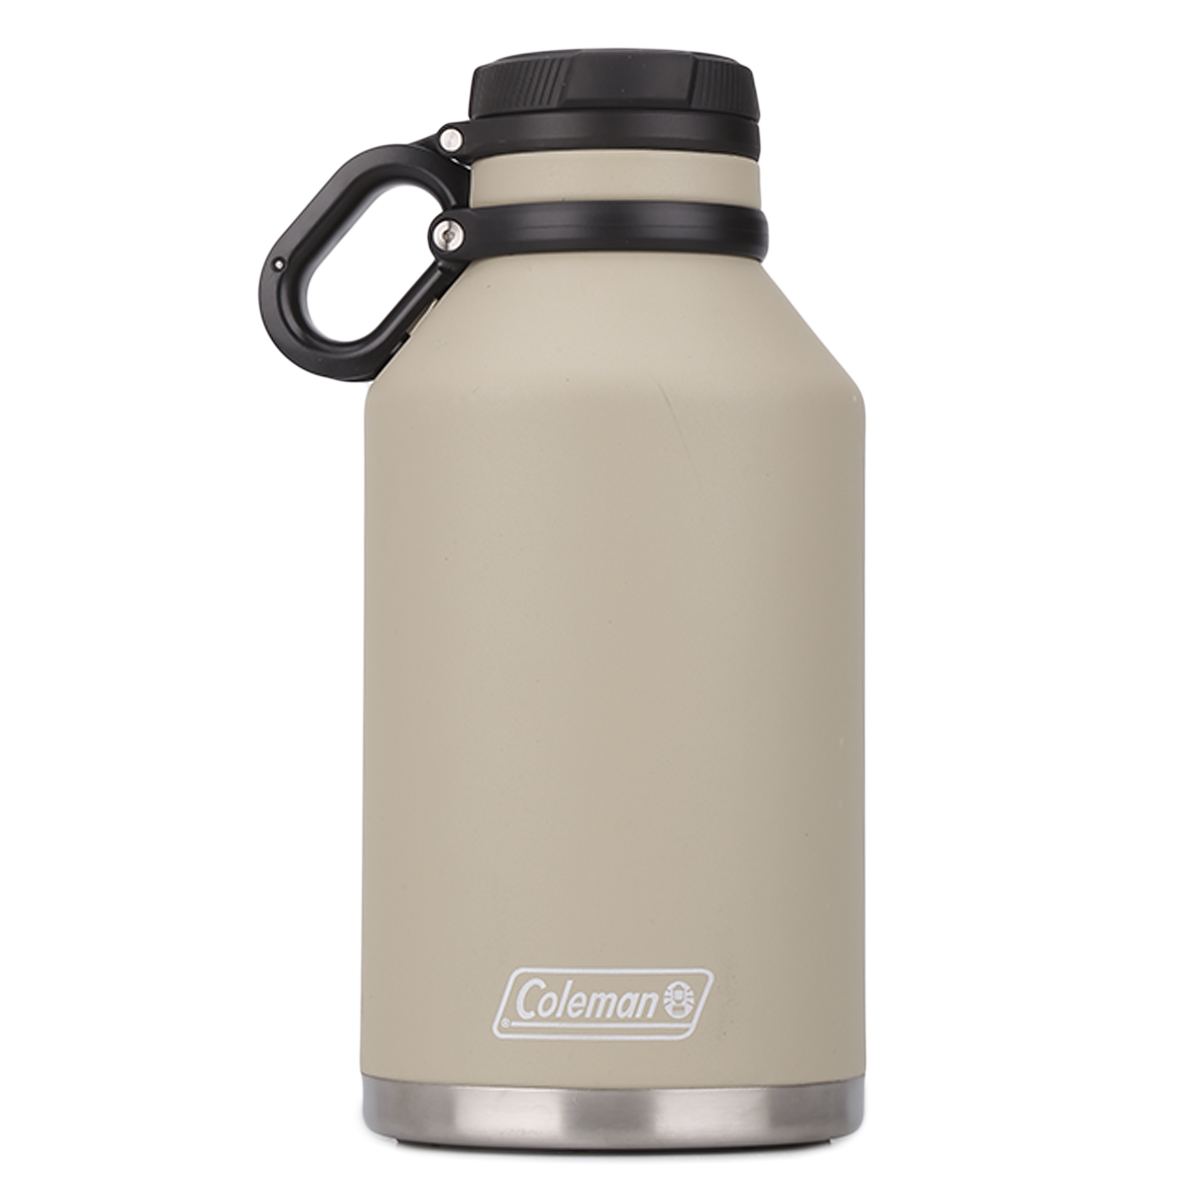 Termo Coleman Acero Inoxidable Growler 1900 Ml,  image number null